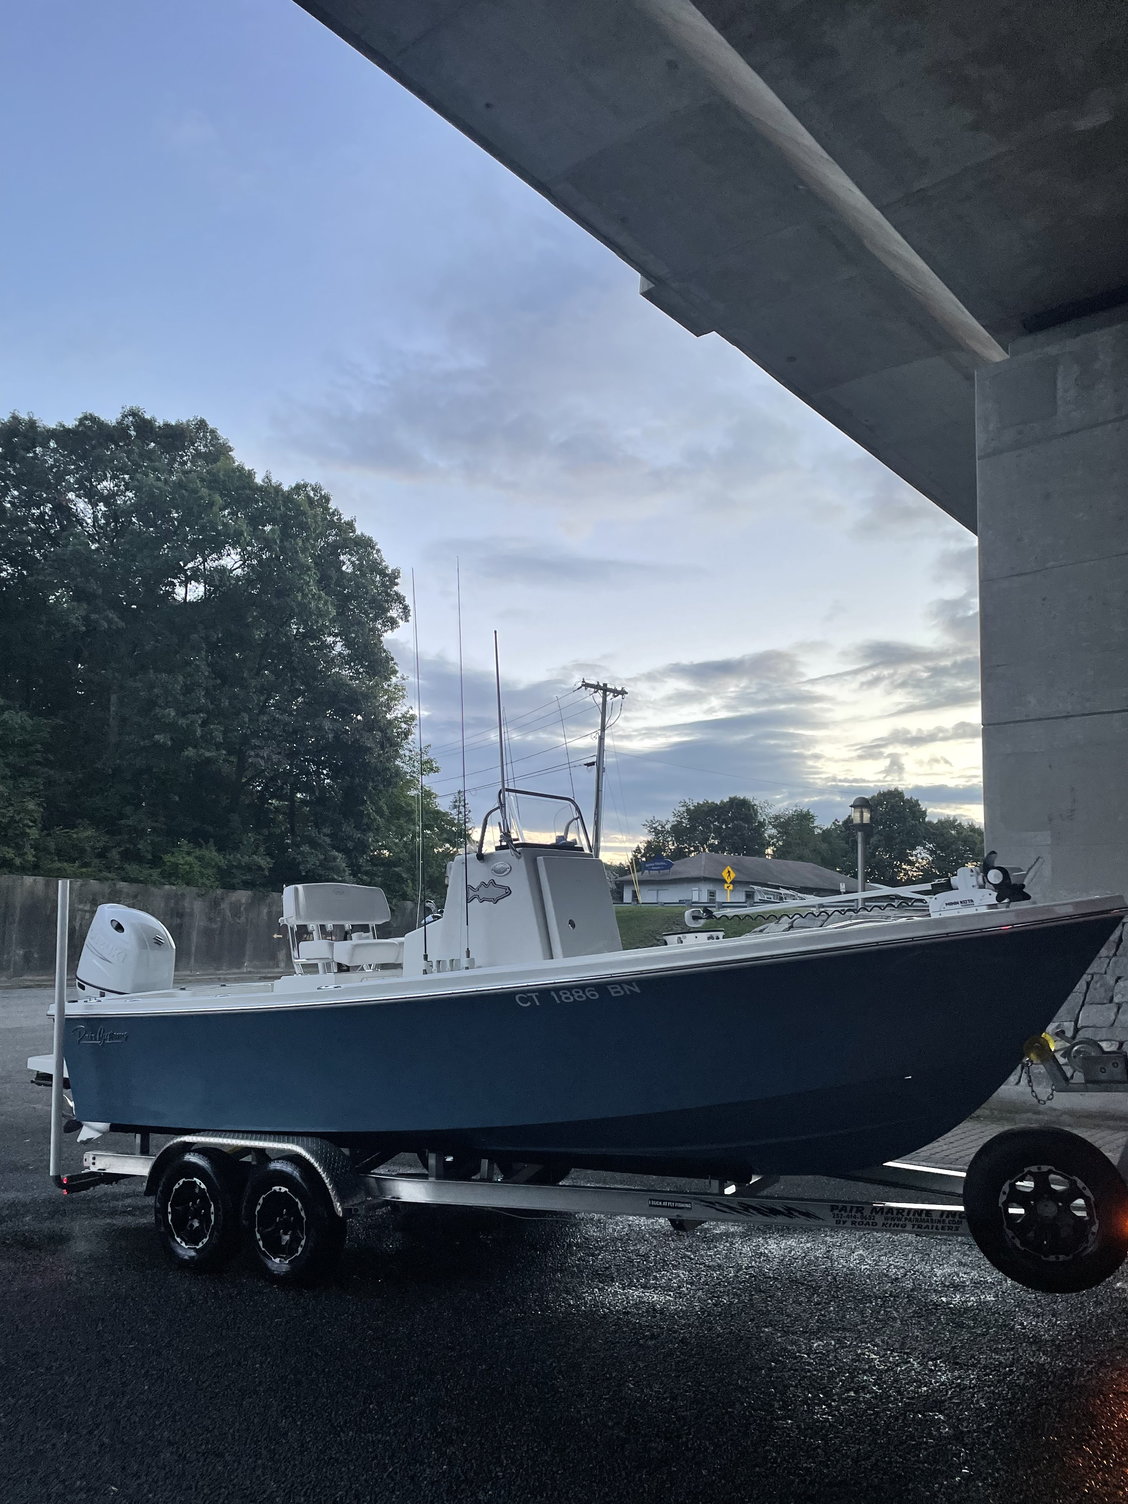 2021 Pair Customs CC For Sale or Trade - The Hull Truth - Boating and  Fishing Forum